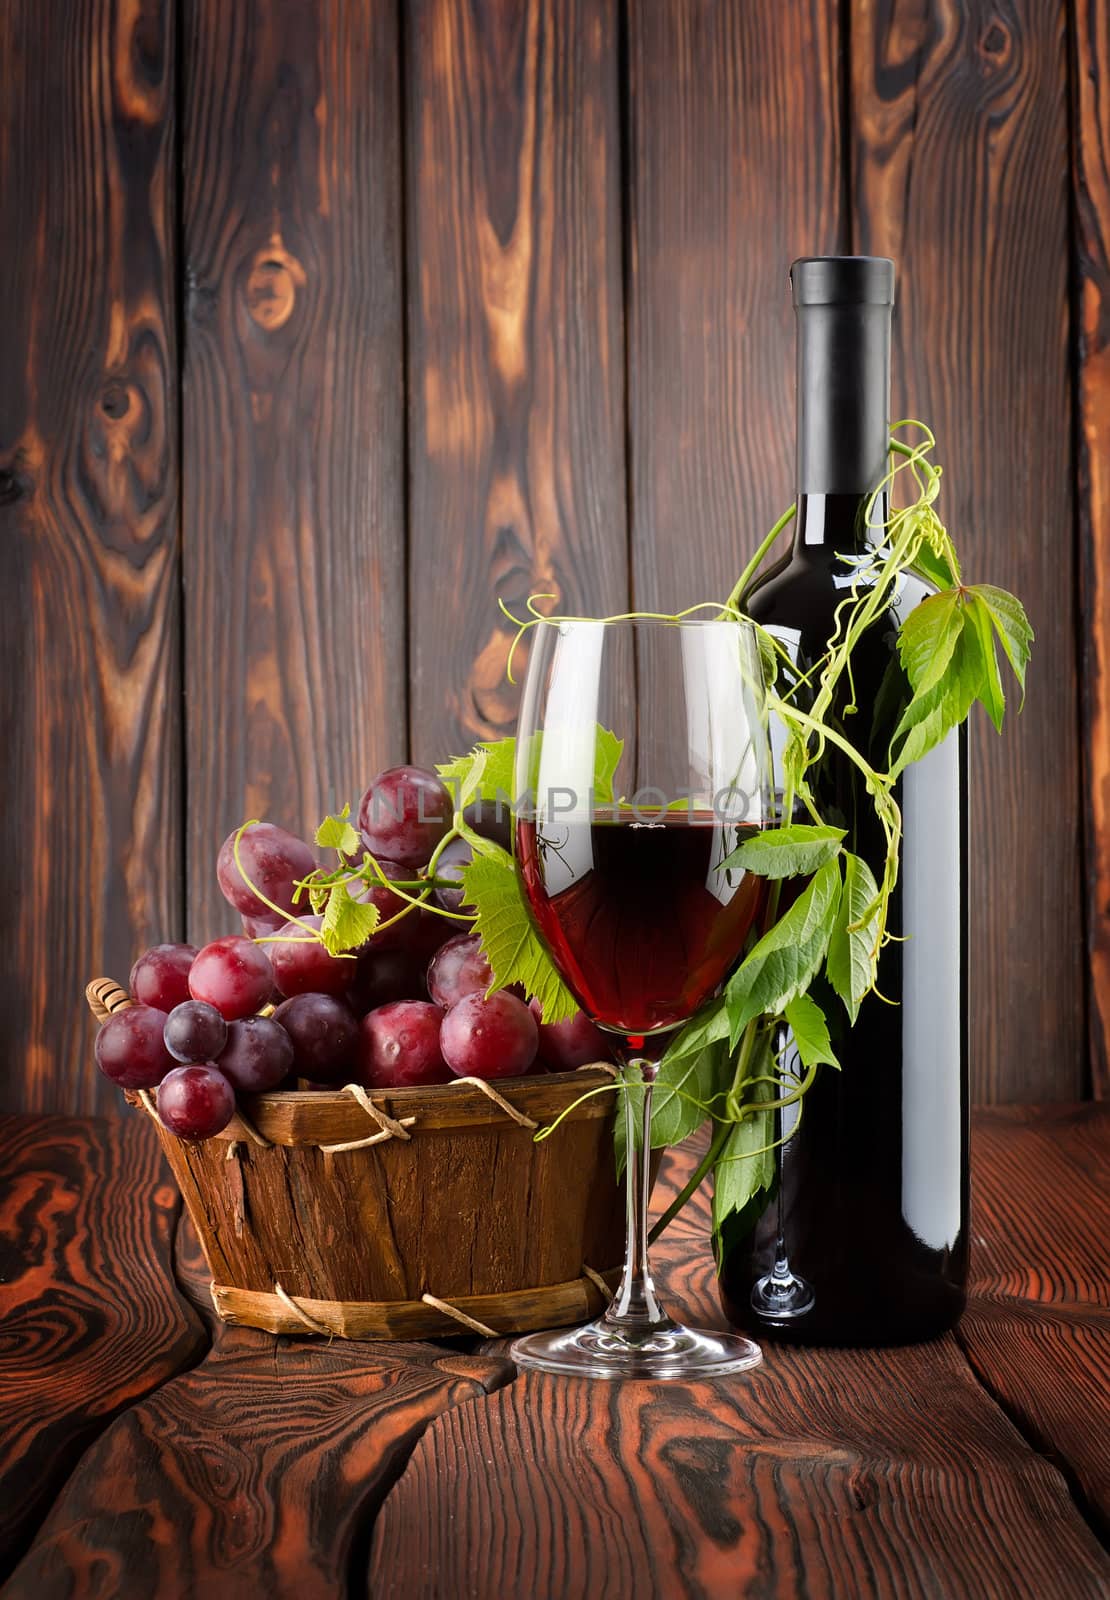 Bottle of wine and grapes by Givaga